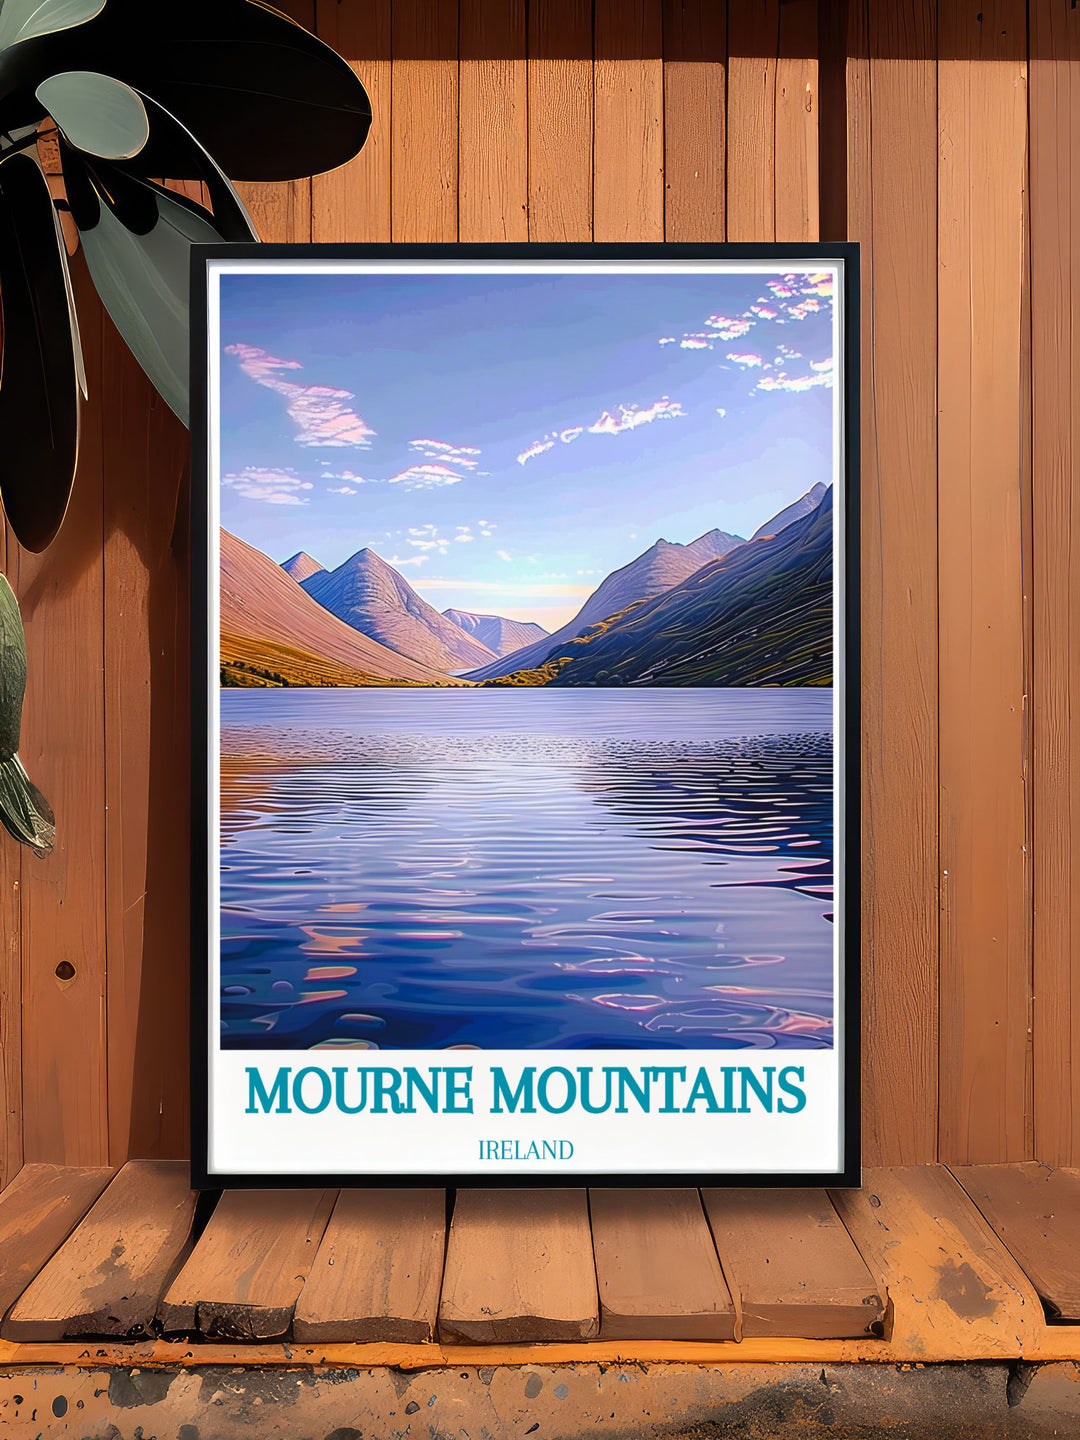 Featuring the iconic peaks and lush valleys of the Mourne Mountains, this poster showcases the regions inviting landscapes, perfect for those who cherish natural and scenic destinations.